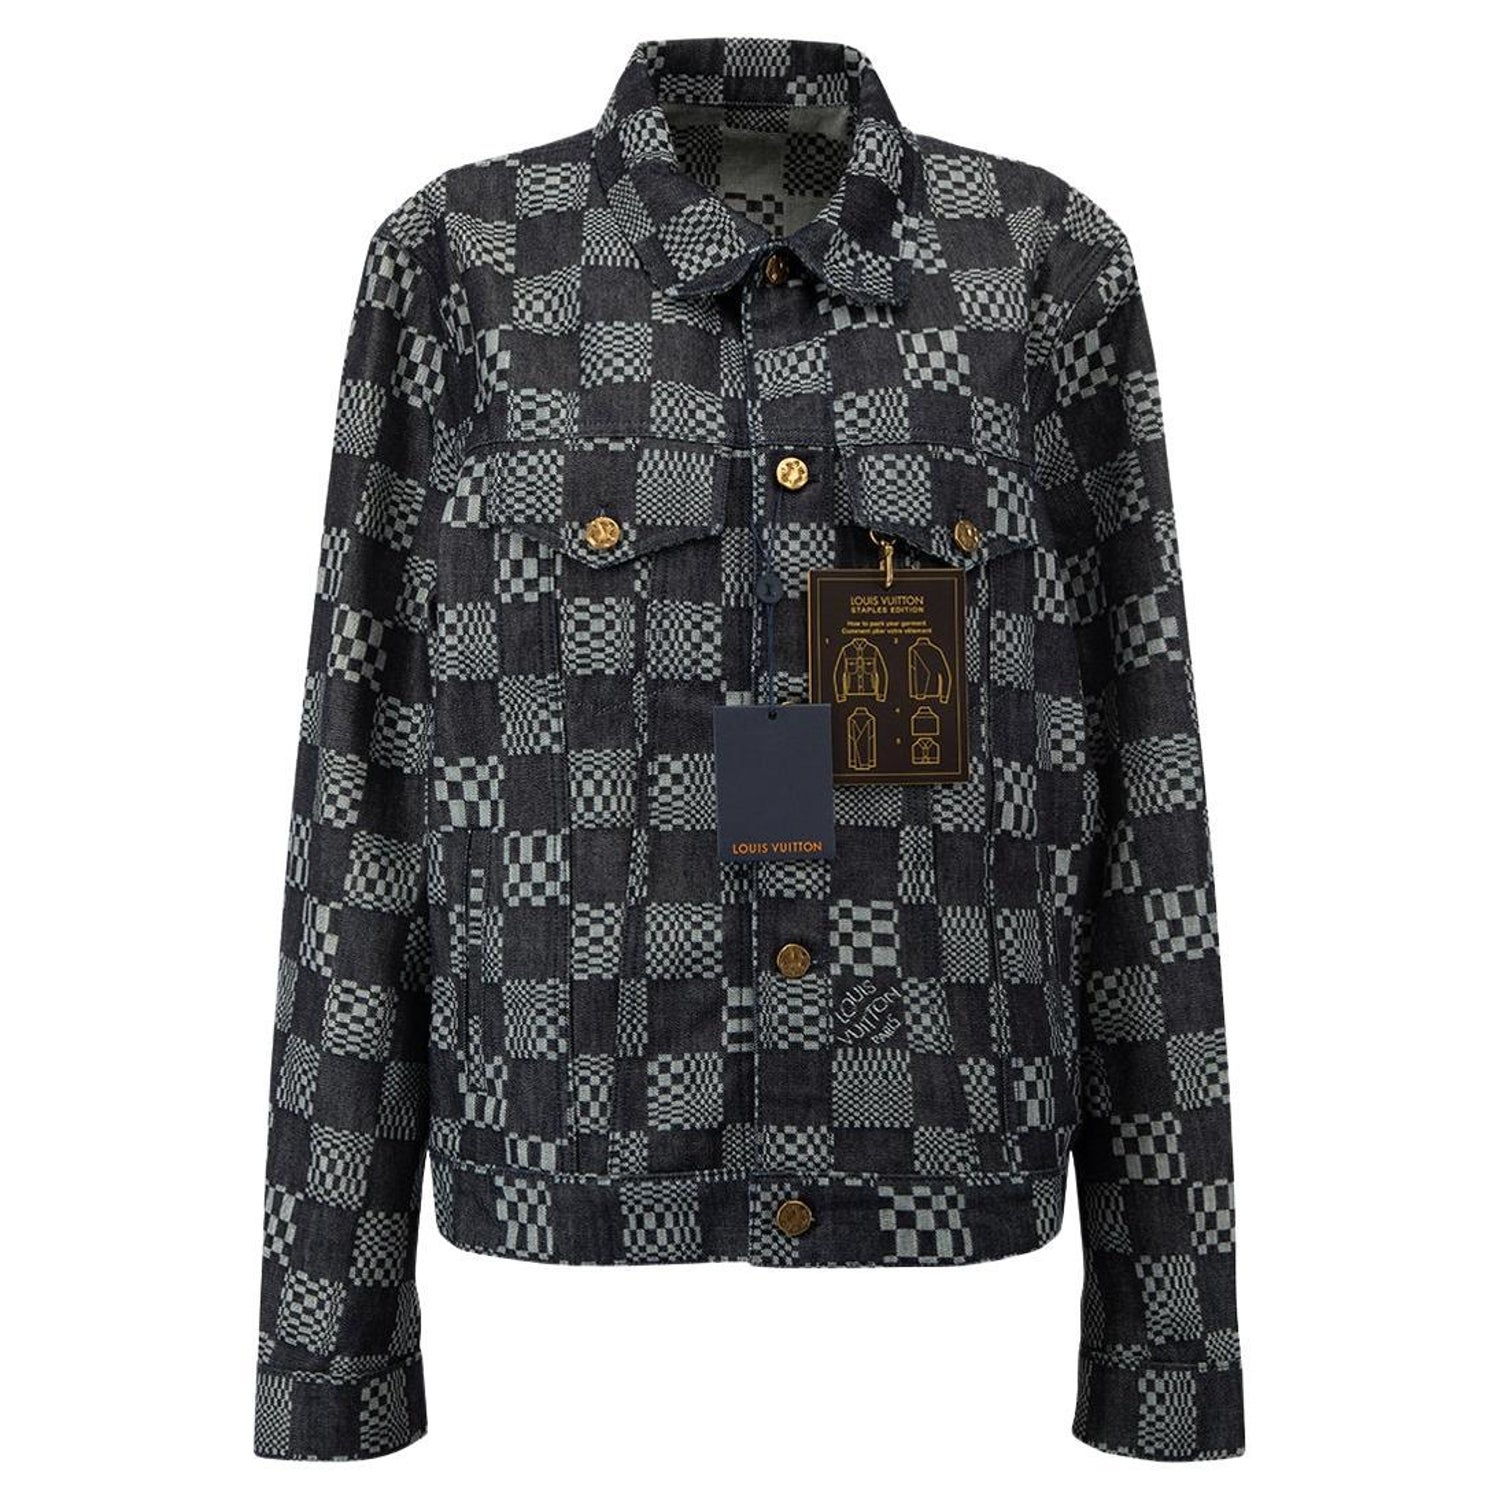 Louis Vuitton Damier Jacket - 5 For Sale on 1stDibs